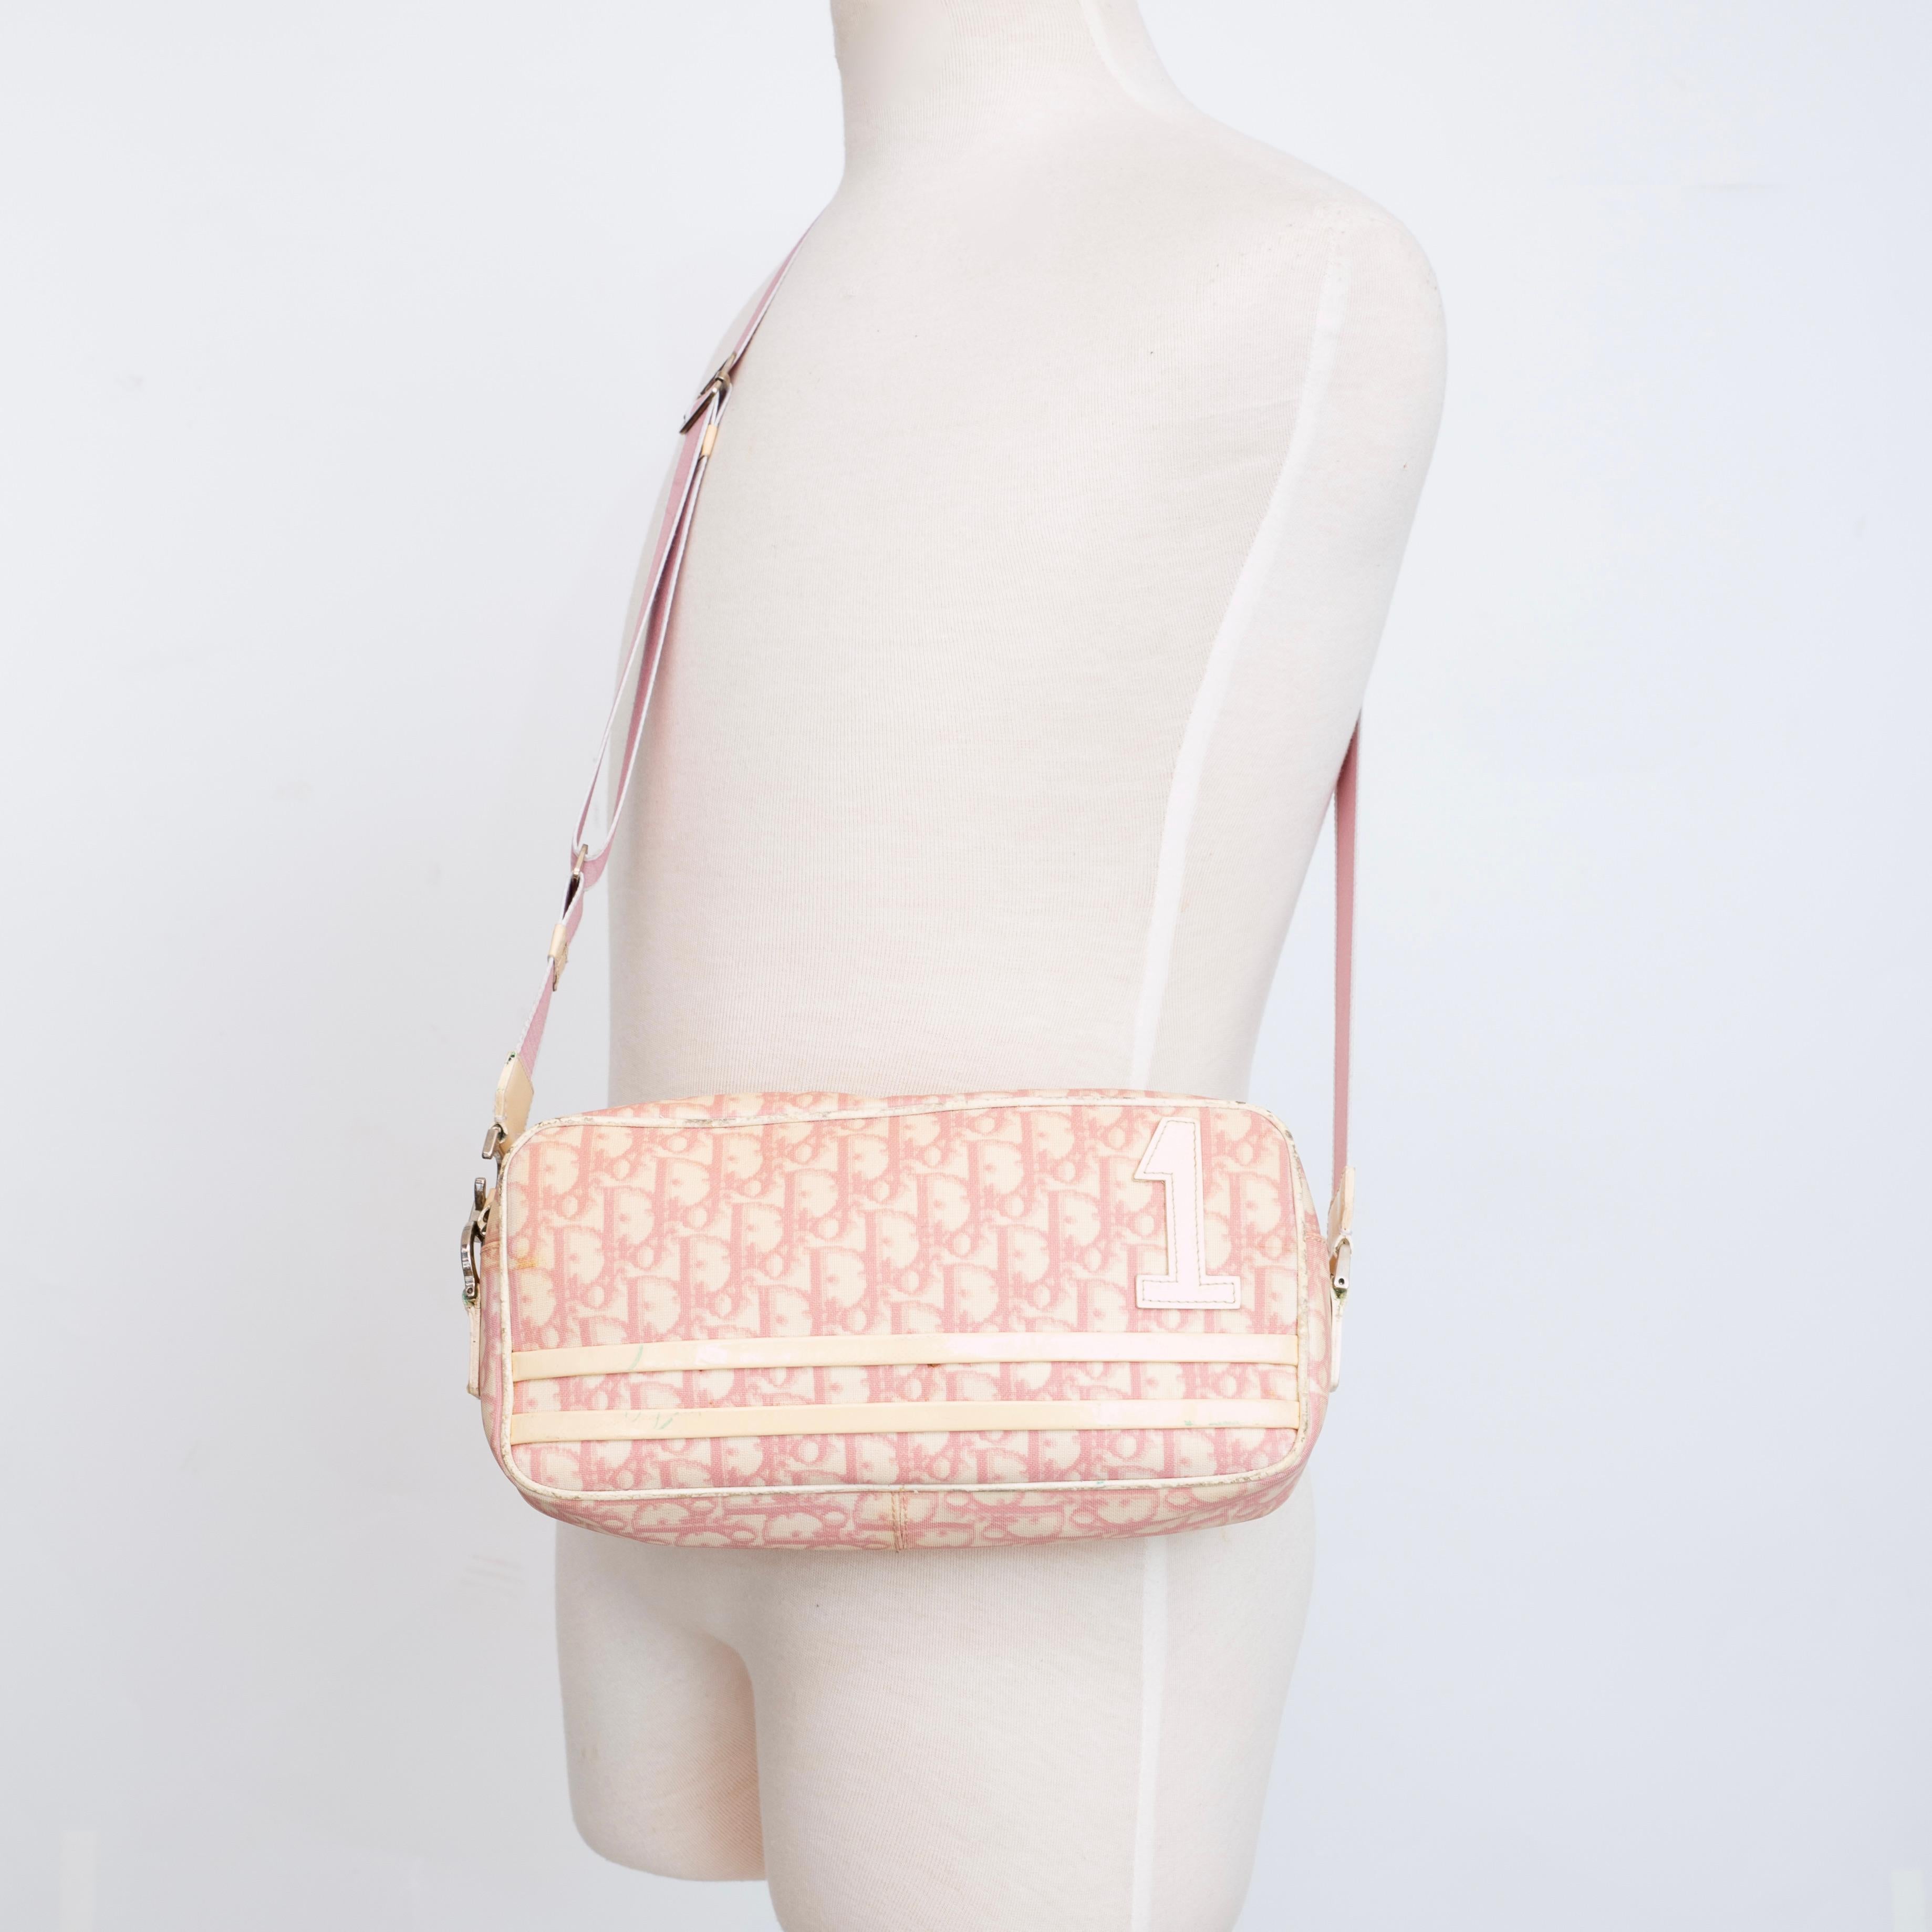 This rectangular shoulder bag is made with white coated canvas with Dior’s oblique monogram print in pink. The bag features studs, a white flower, “number 1” and studs embroidered on the front. Designed by Galliano.

COLOR: Pink monogram
MATERIAL: